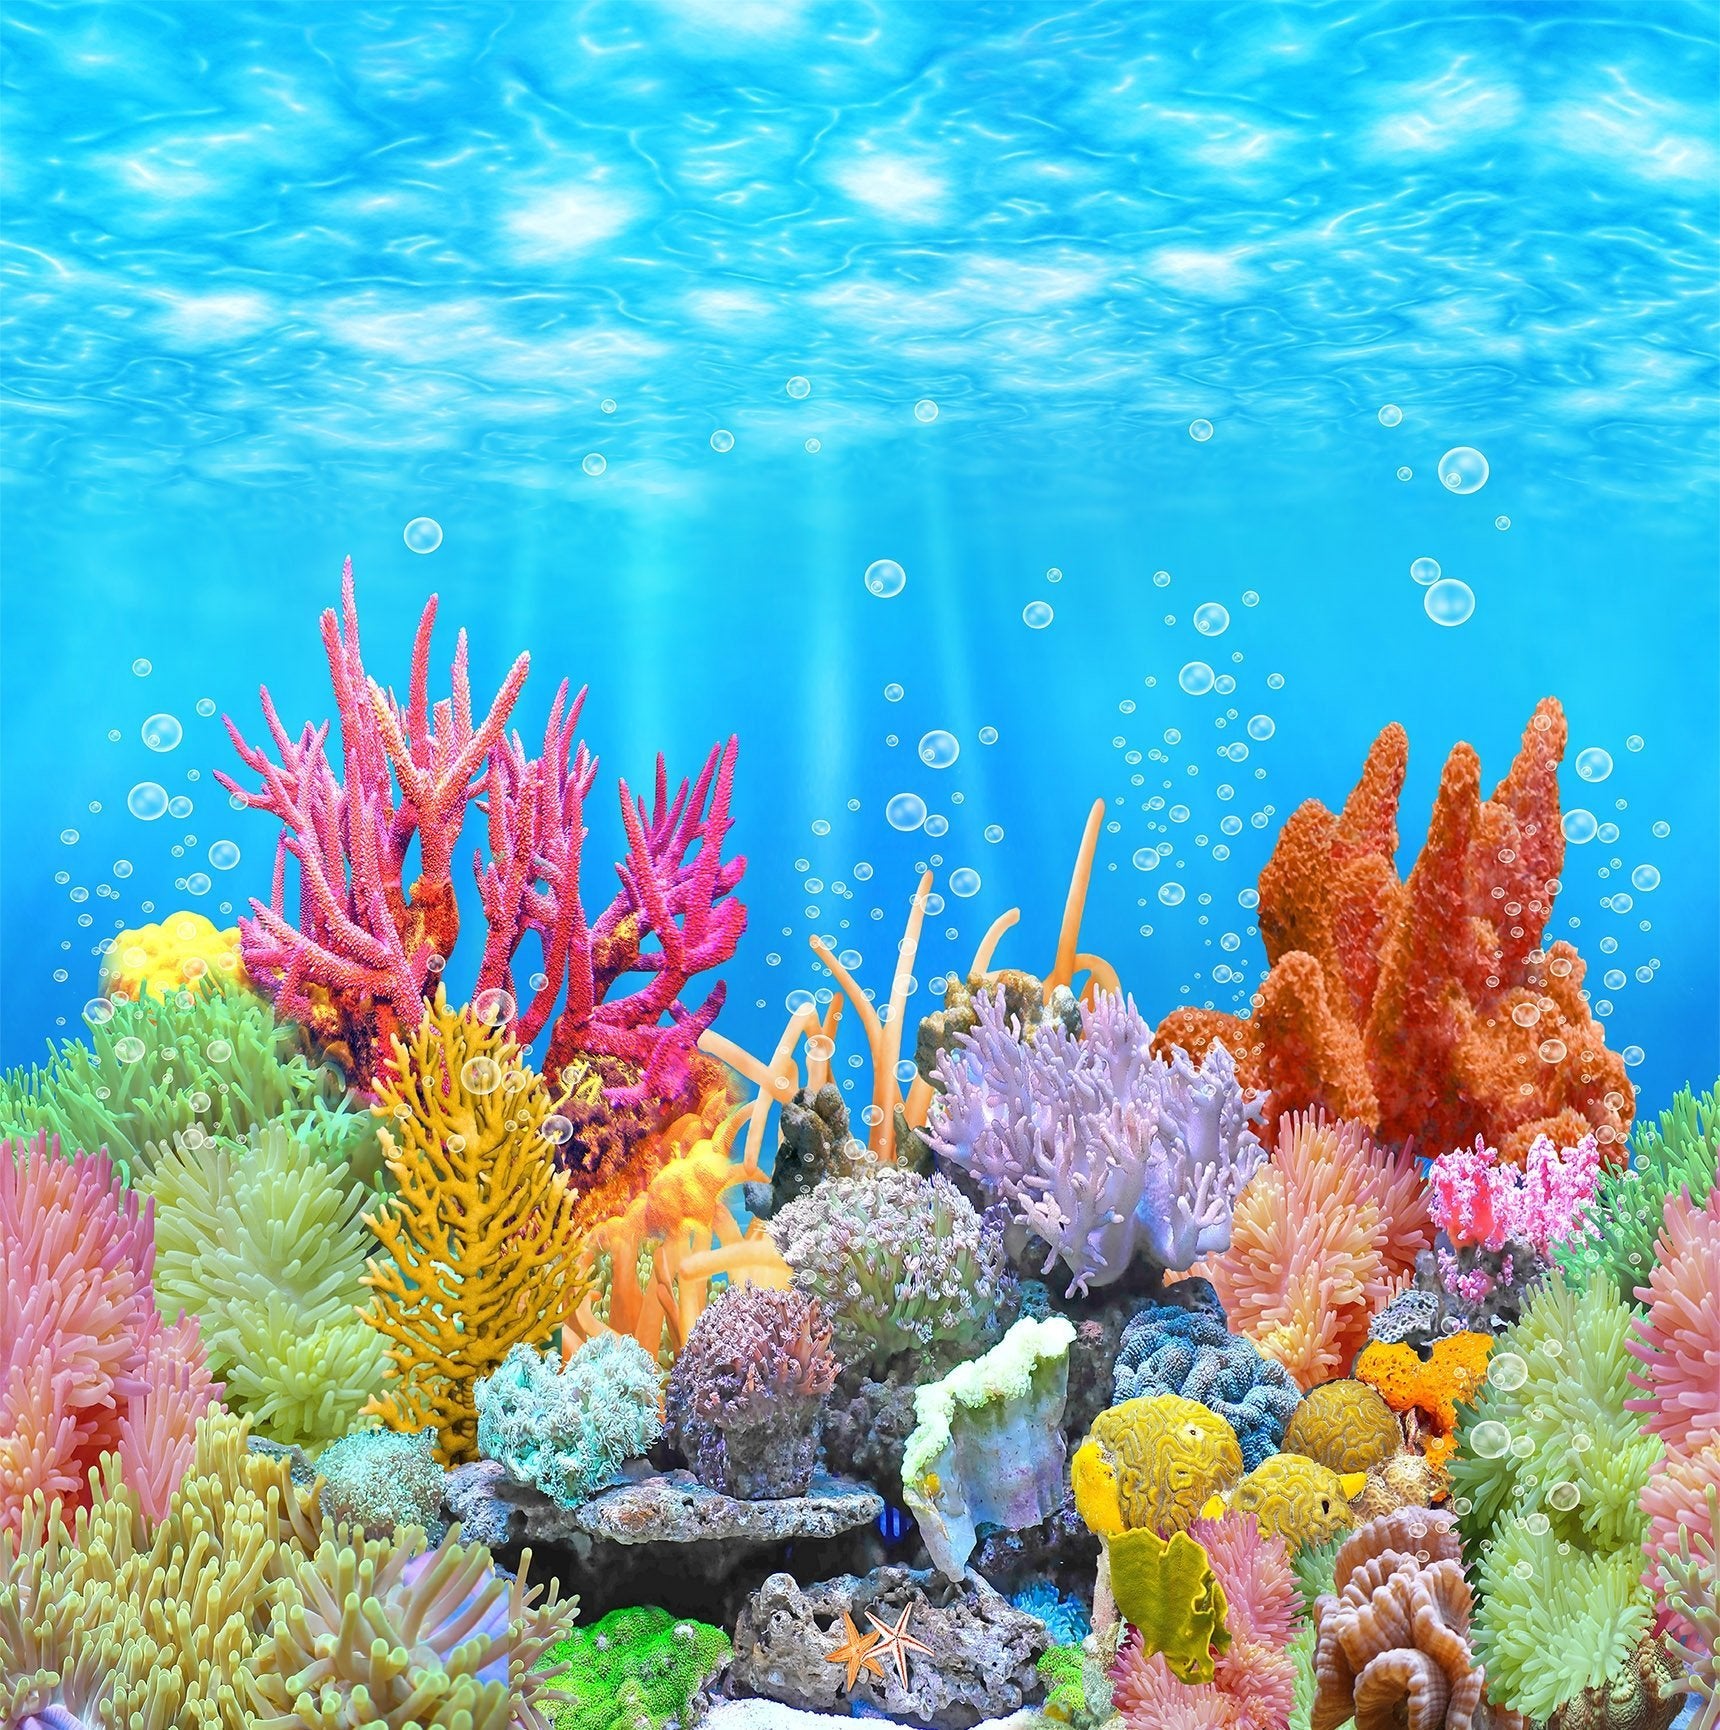 3D Seabed Colored Coral 318 Wallpaper AJ Wallpaper 